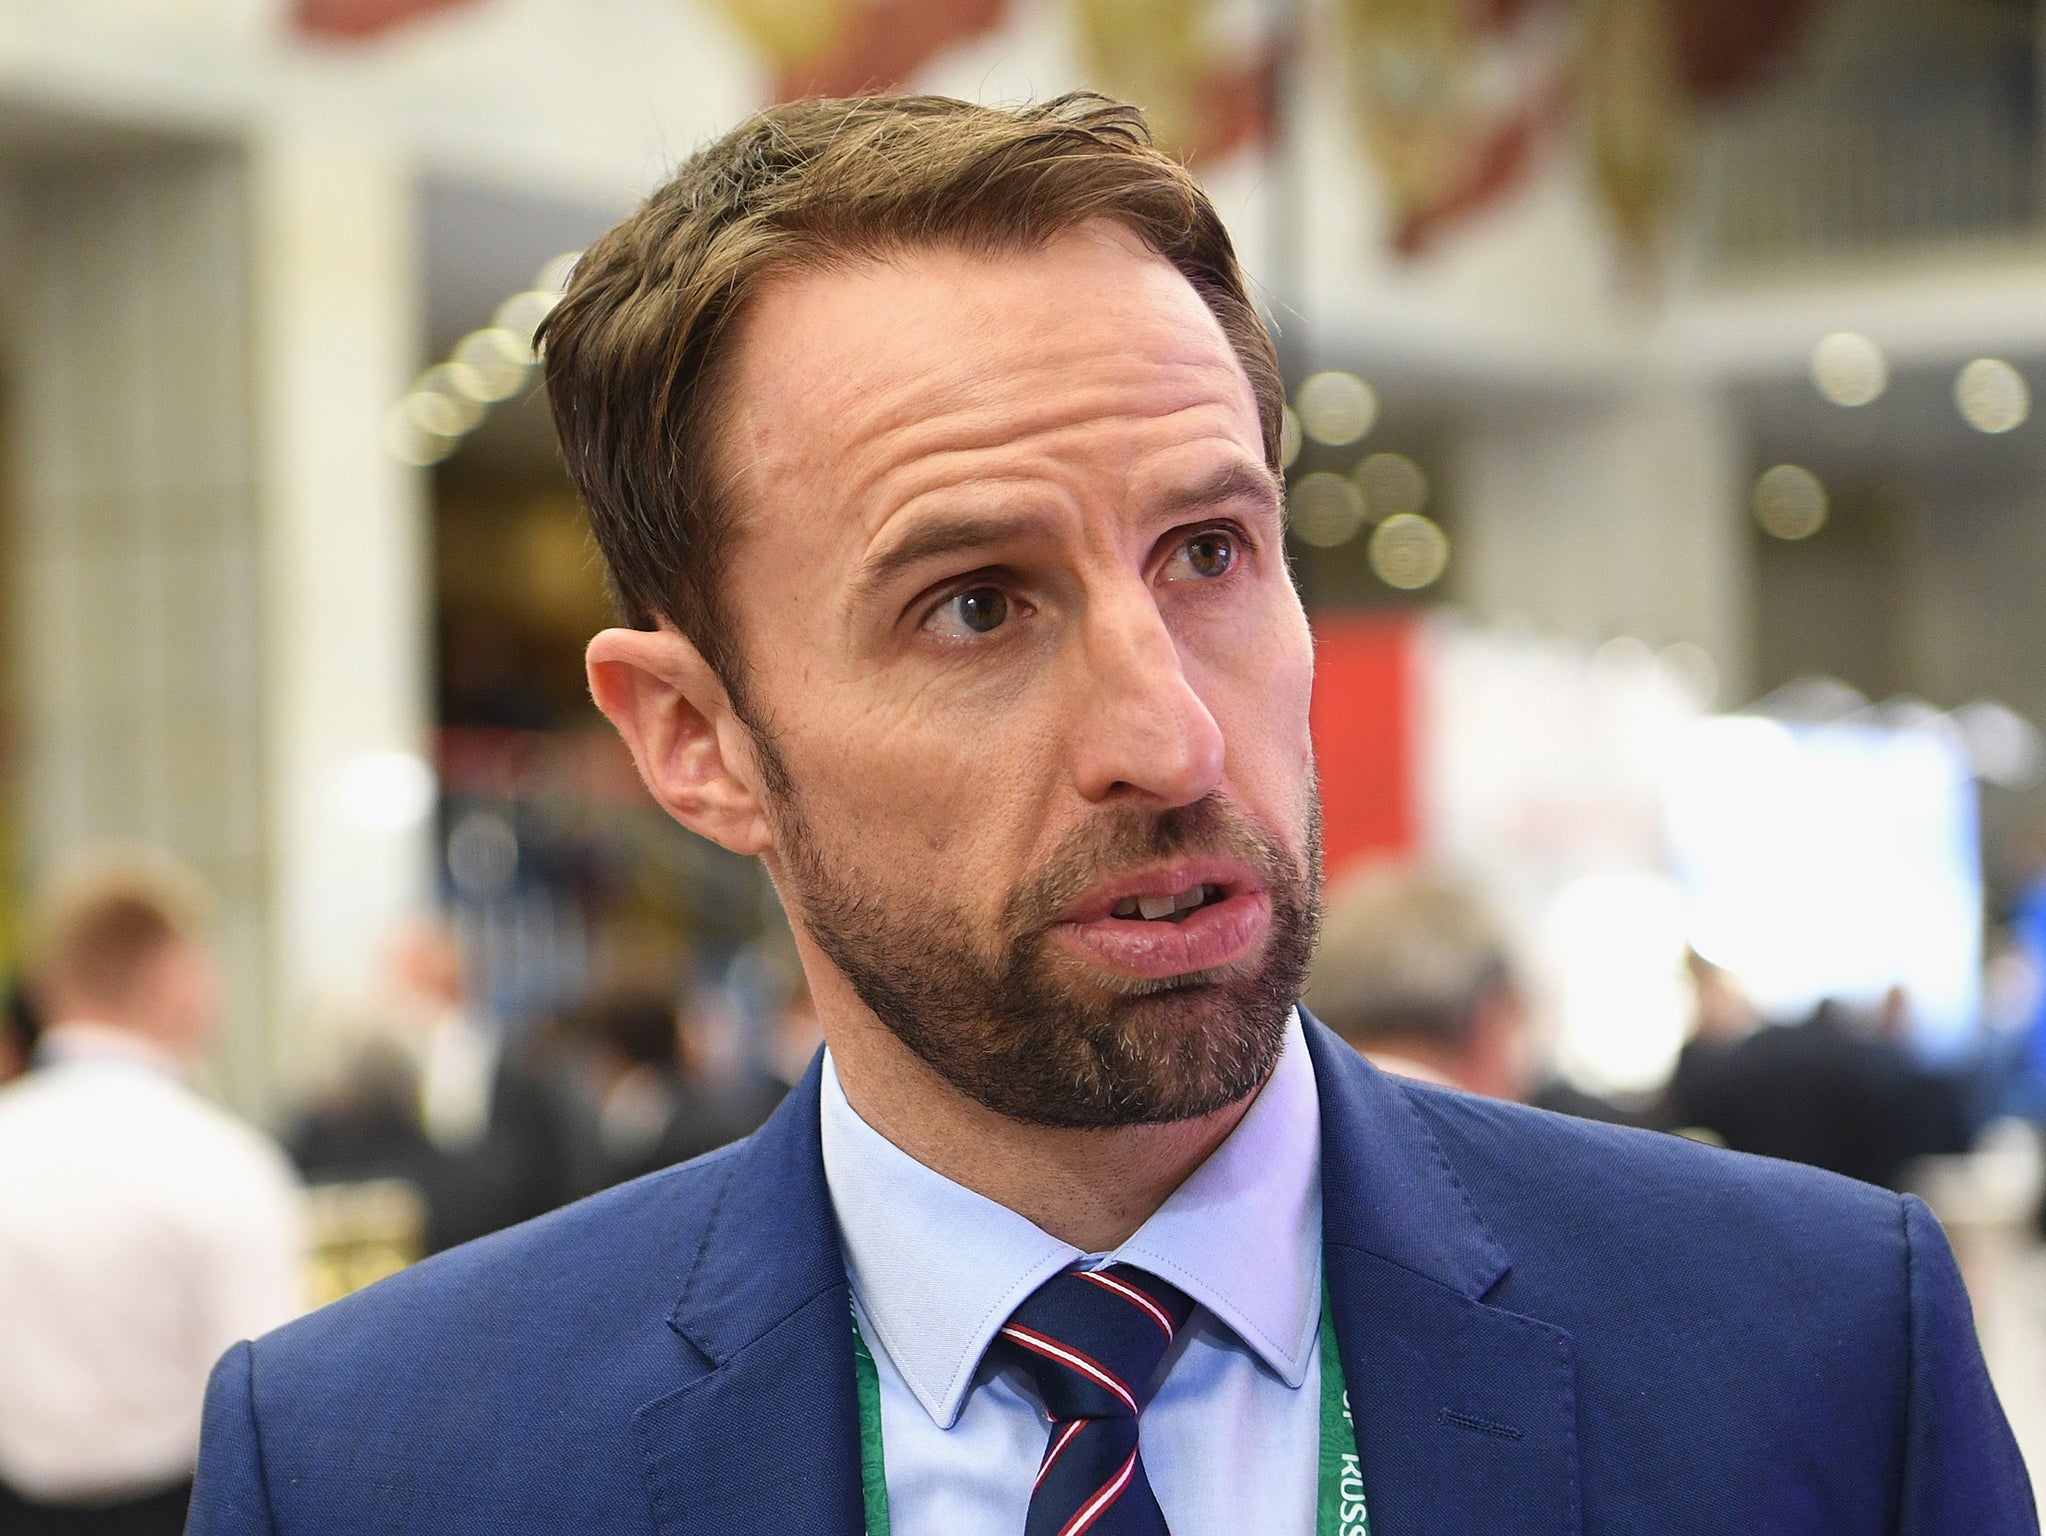 Gareth Southgate has the backing of the FA to develop this England side